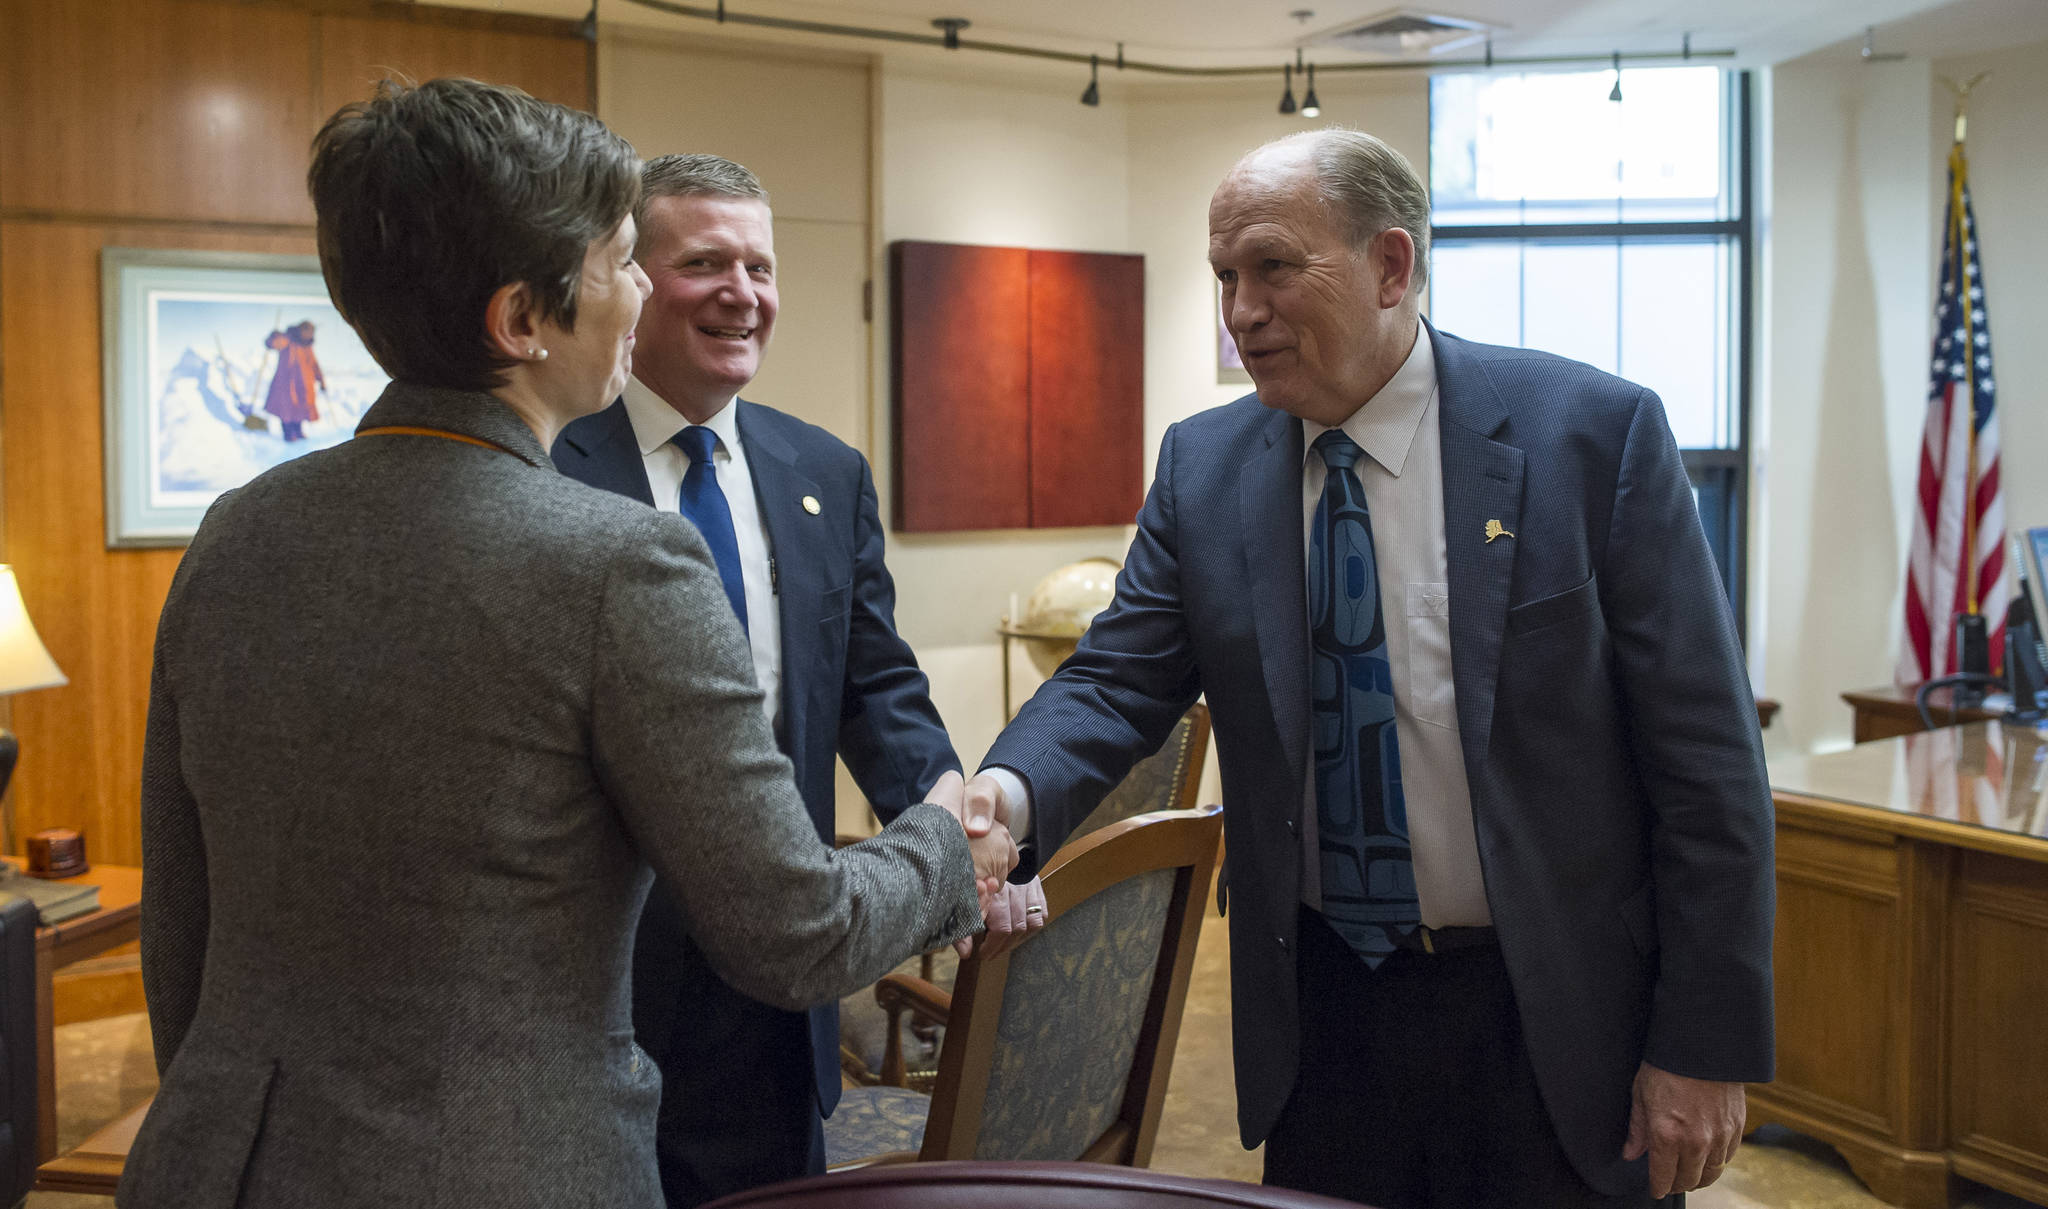 Rep. Ivy Spohnholz, D-Anchorage, left, and Rep. Chuck Kopp, R-Anchorage, deliver a message to Gov. Bill Walker that the House is open for business on Tuesday, Jan. 16, 2018. Legislators returned to Alaska’s Capitol to open the Second Session of the 30th Legislature on Tuesday. (Michael Penn | Juneau Empire)